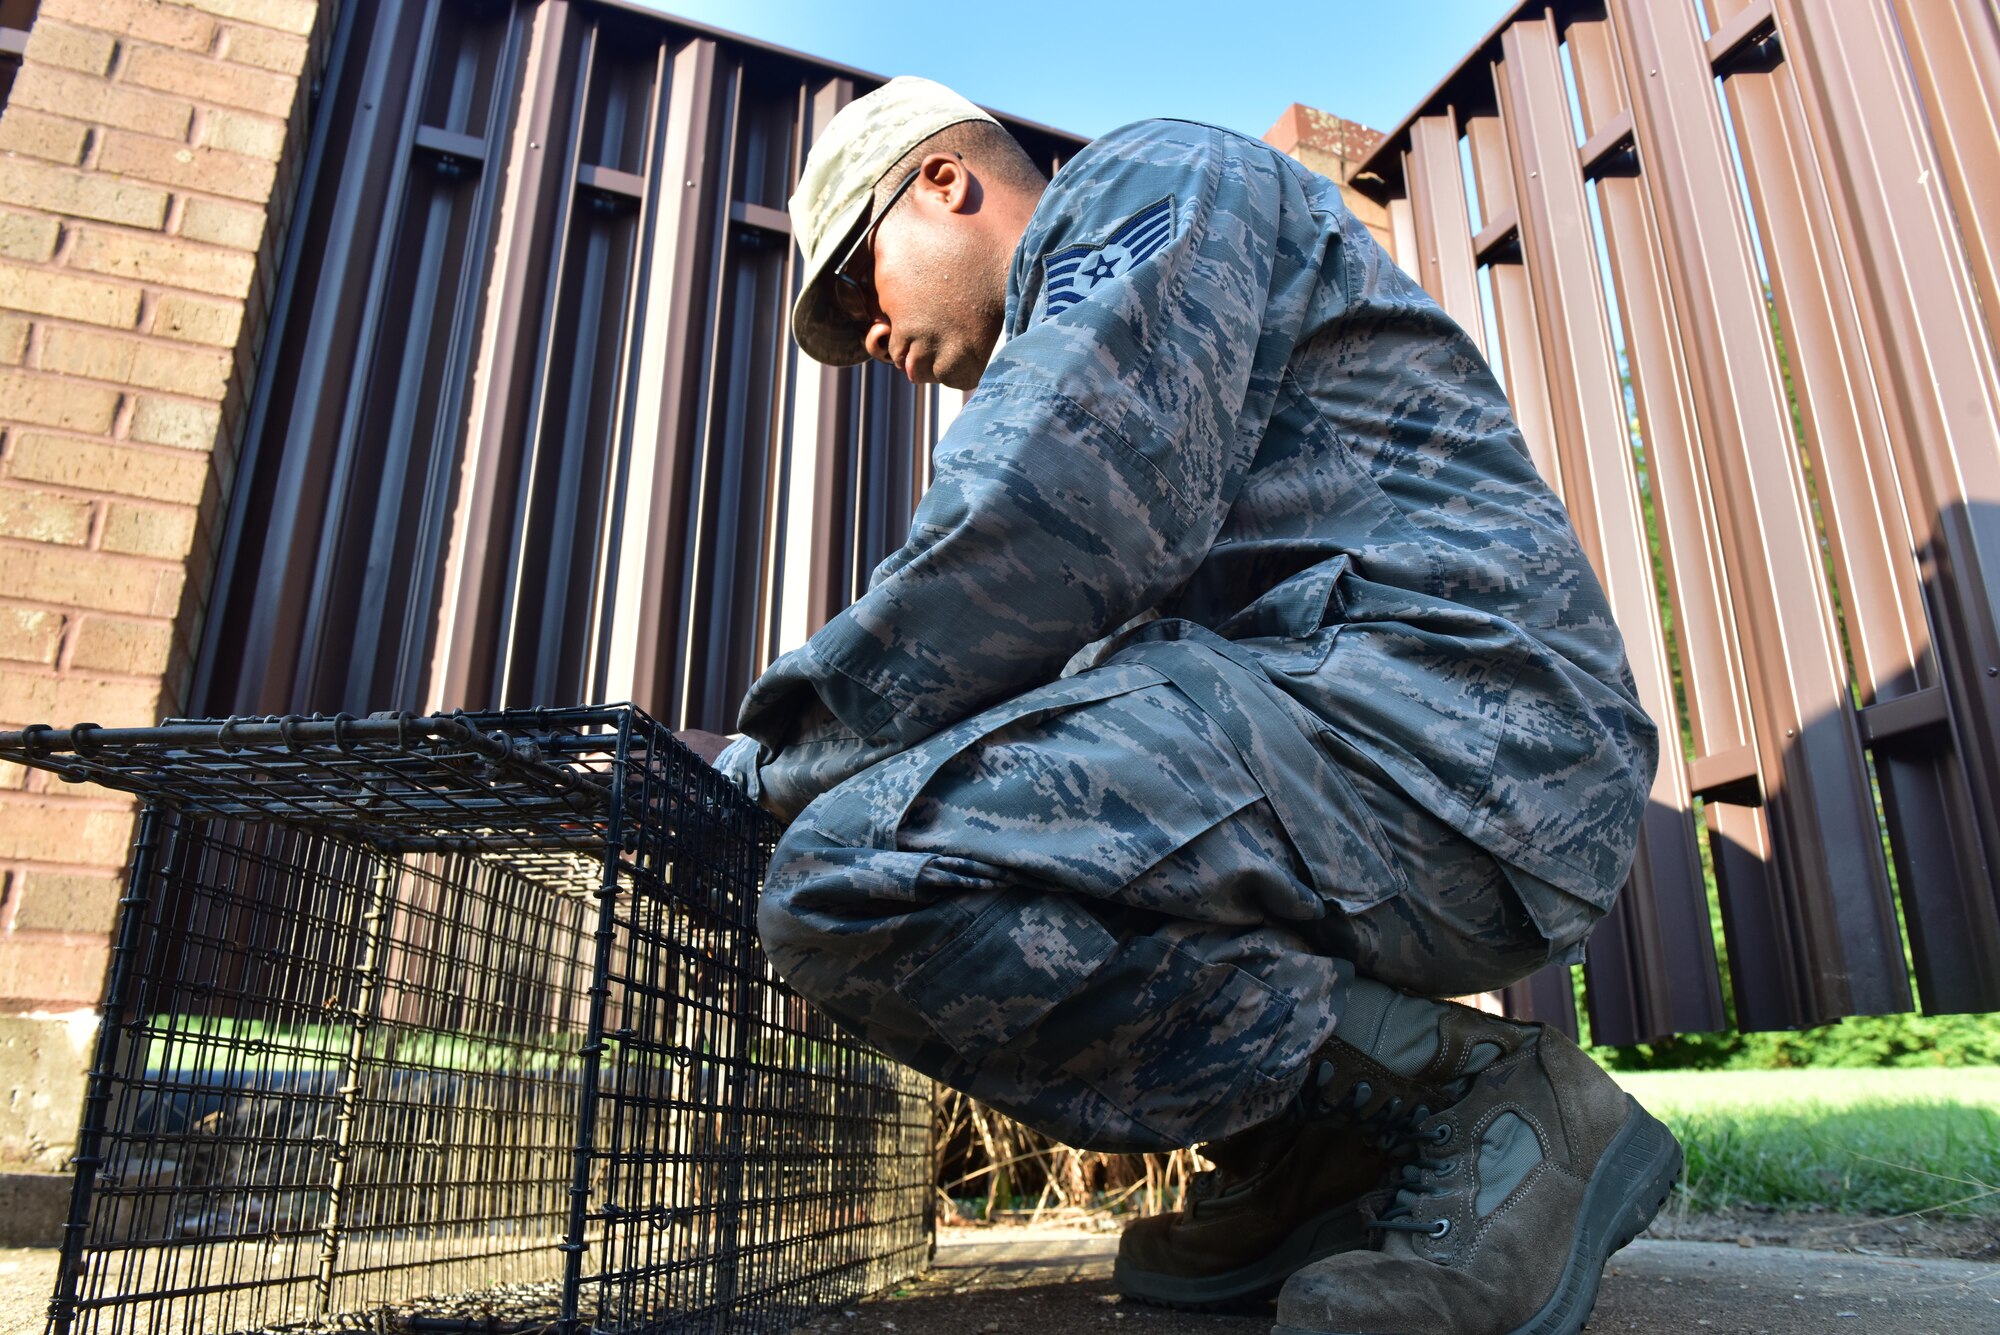 Tech. Sgt. Richard Mauldin, a pest control specialist assigned to the 509th Civil Engineer Squadron, places a single-door trap behind a dumpster on Whiteman Air Force Base, Mo., Aug. 2, 2017.